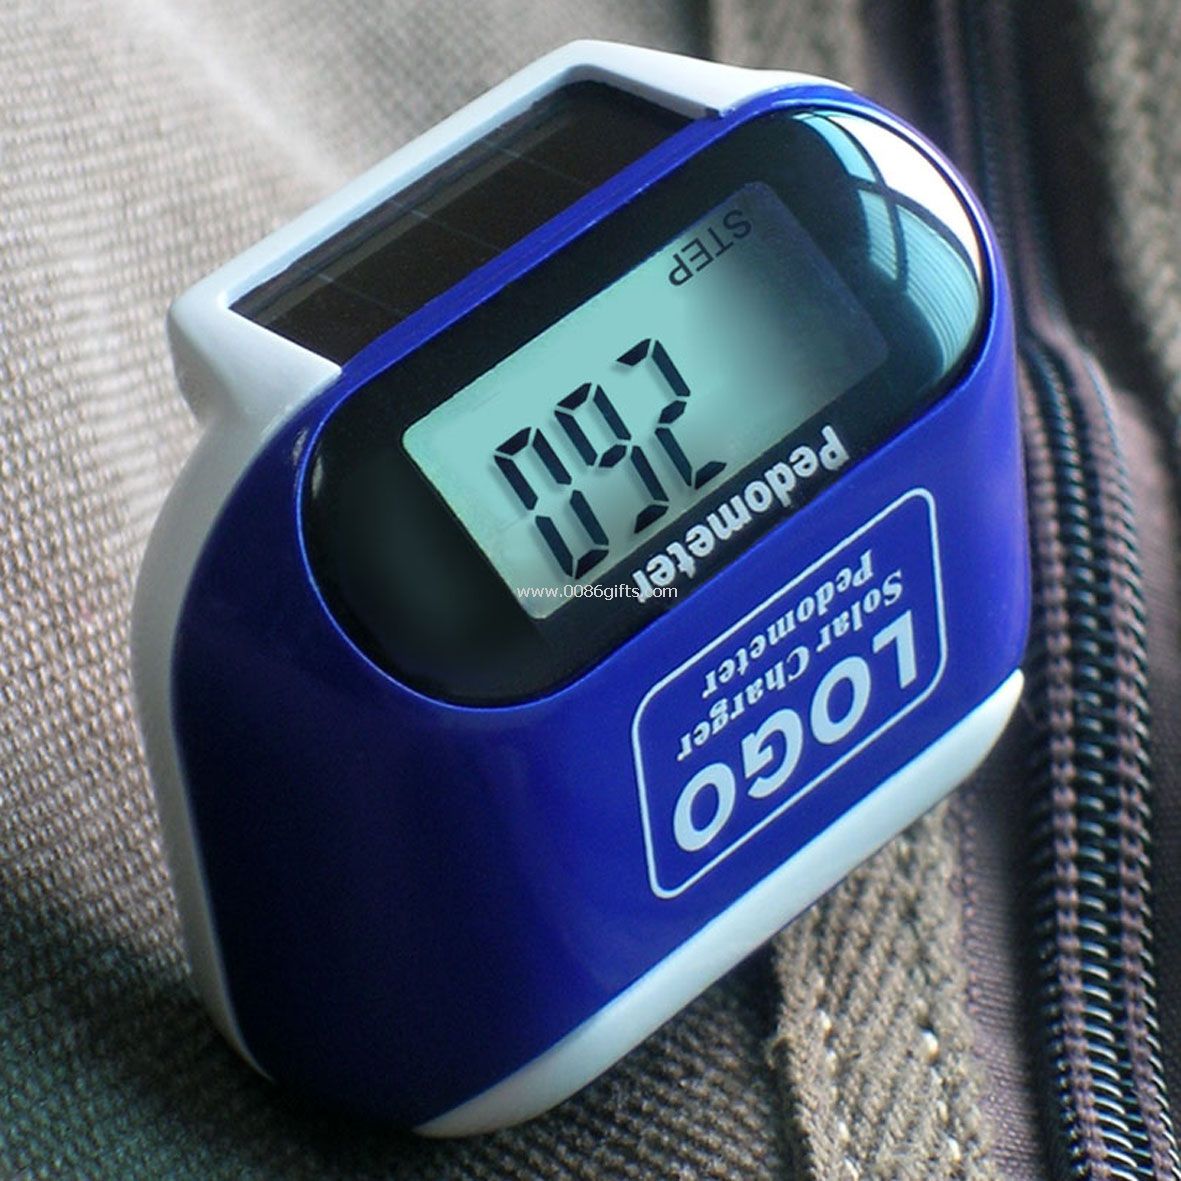 Solar powered pedometer with calorie counter